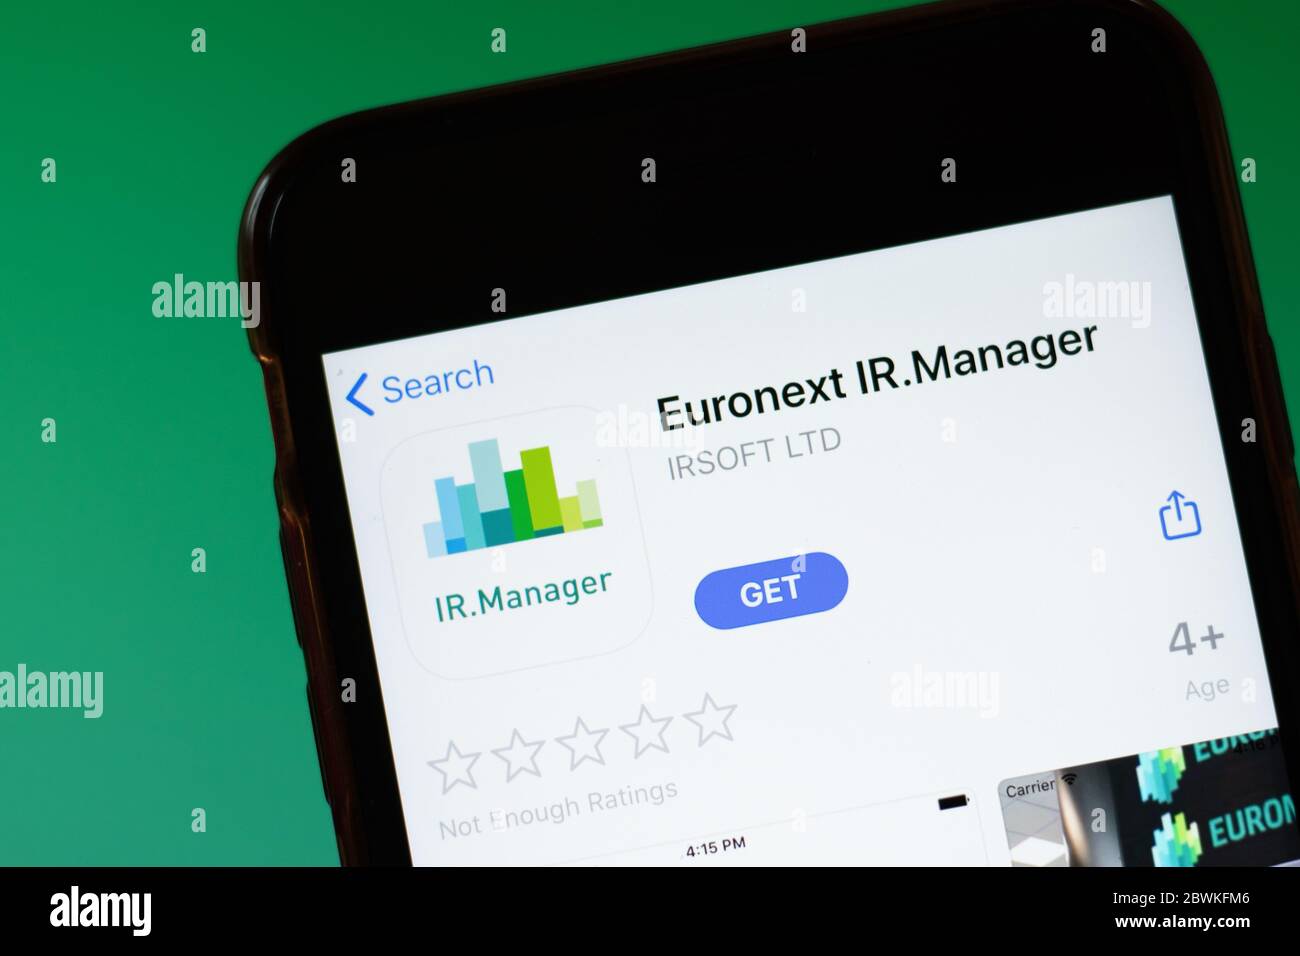 Moscow, Russia - 1 June 2020: Euronext IR.Manager app mobile logo close-up on screen display, Illustrative Editorial. Stock Photo